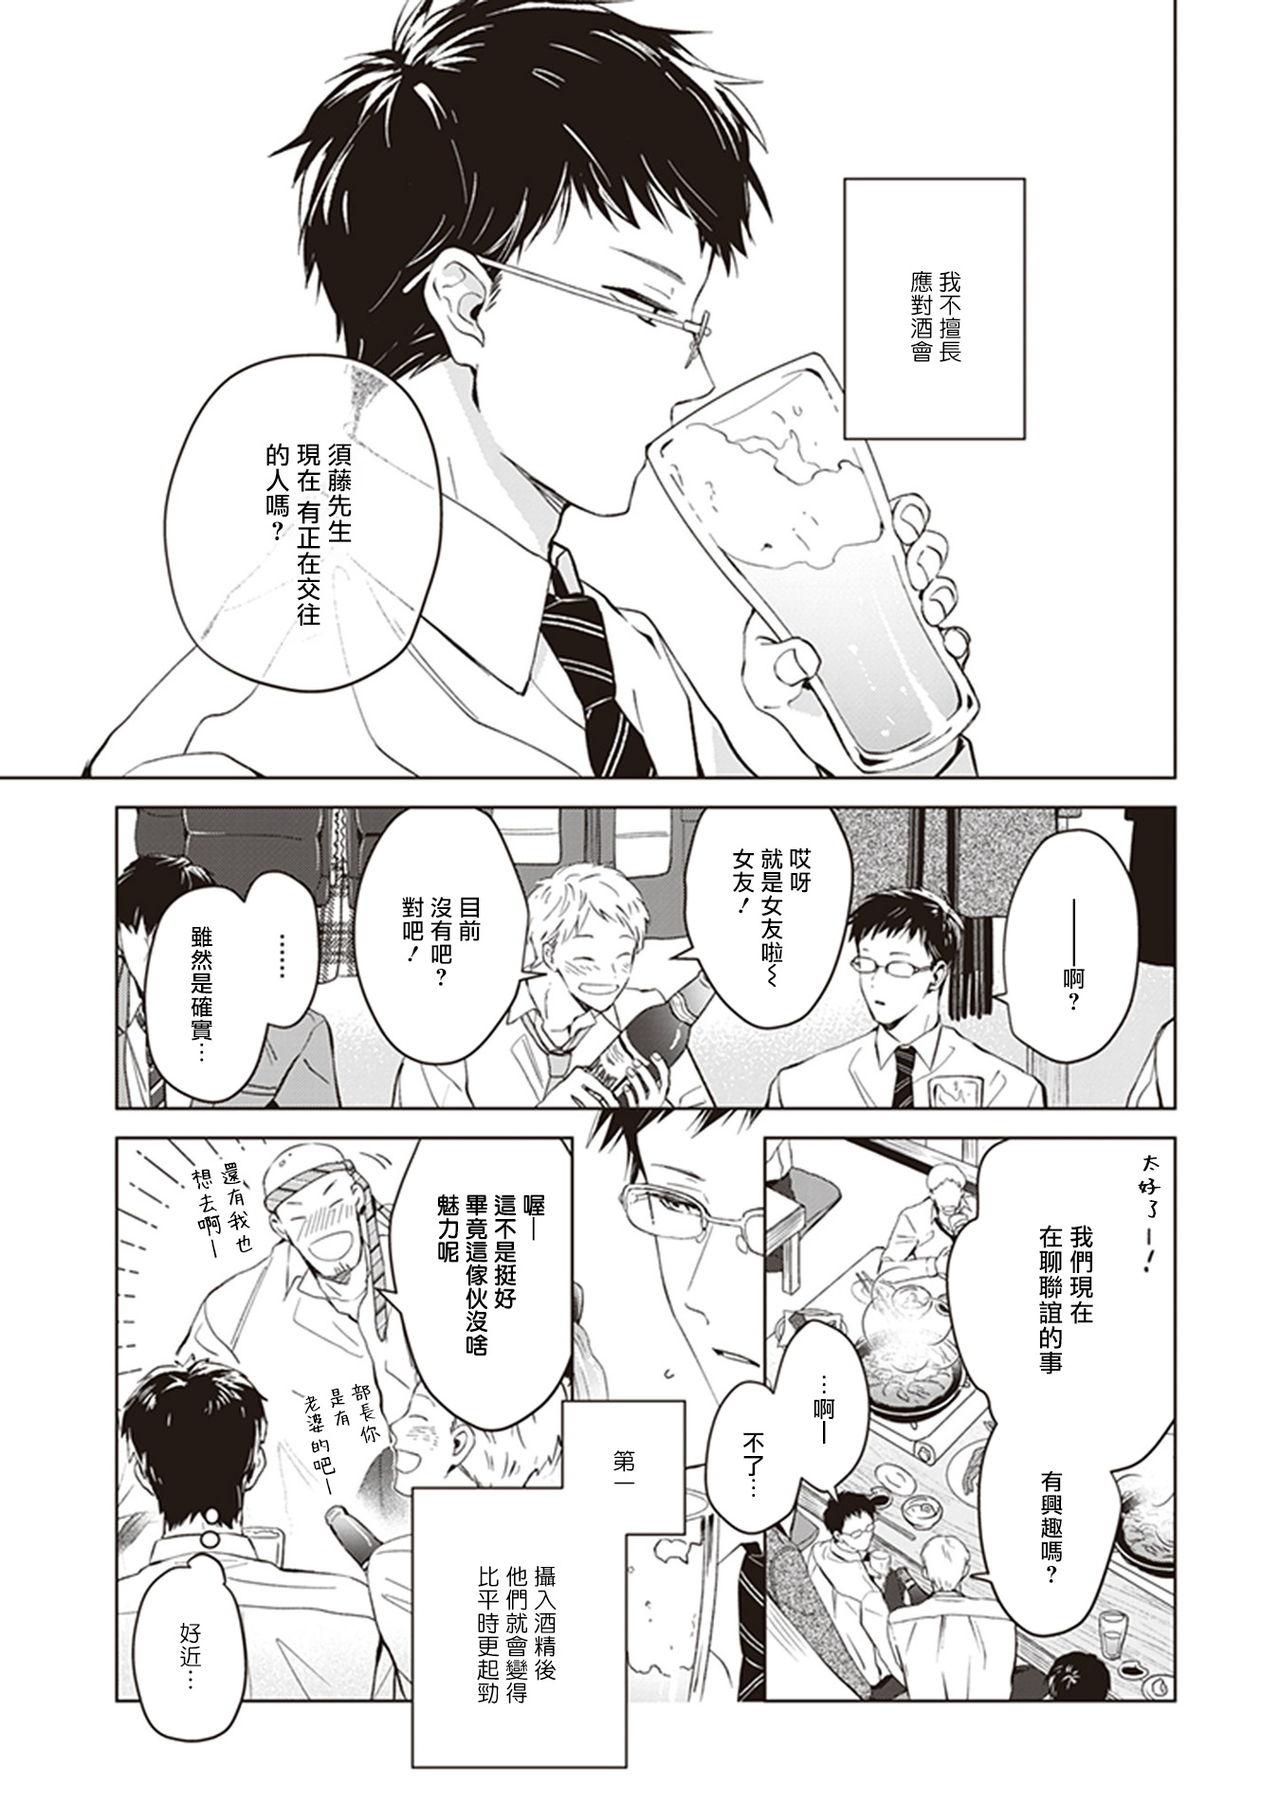 Mulher 隔壁的他 01 Chinese Facesitting - Page 7